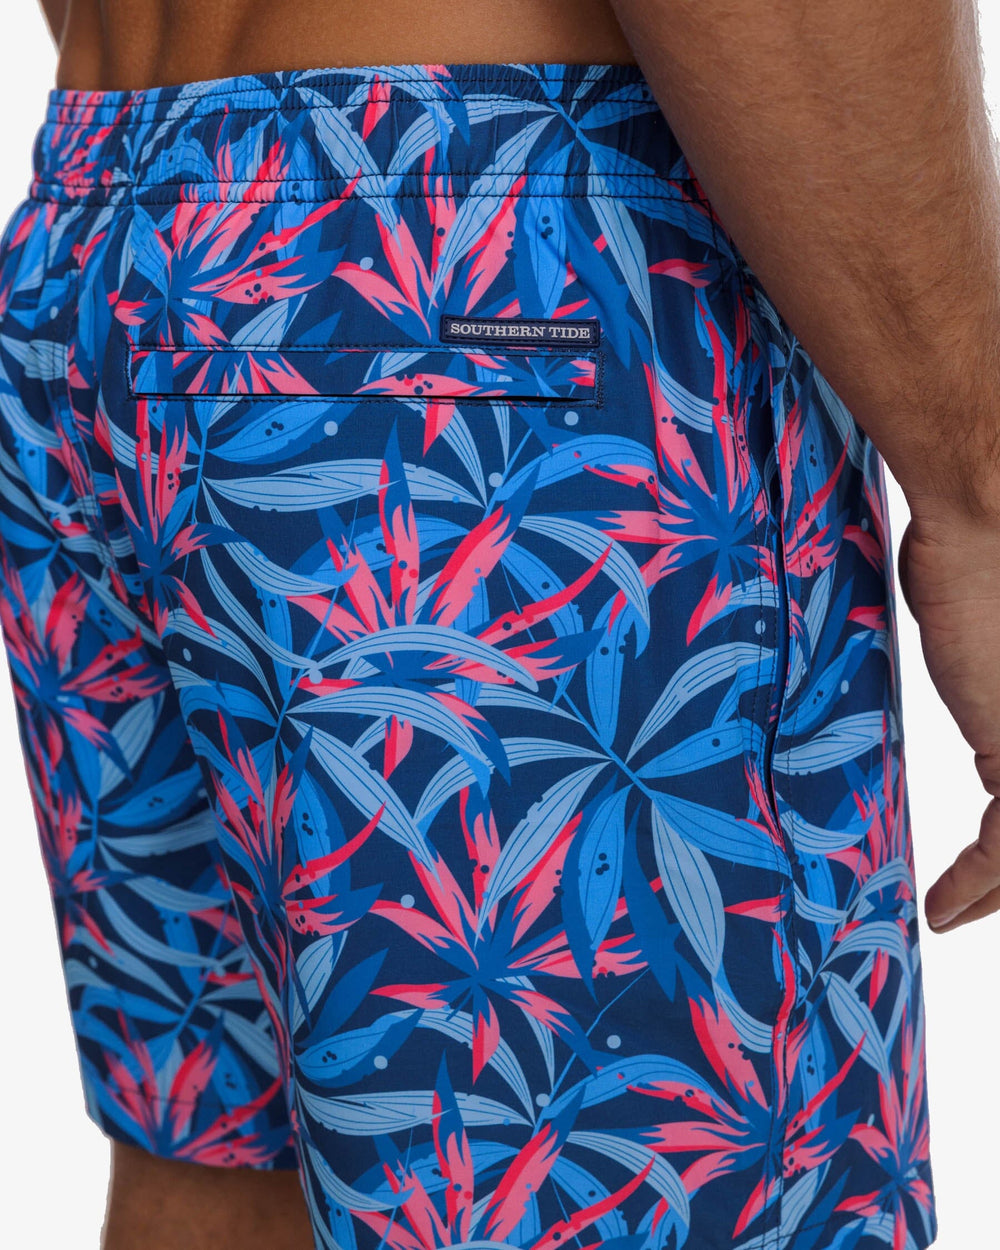 The detail view of the Southern Tide Tropical Blooms Printed Swim Trunk by Southern Tide - Aged Denim